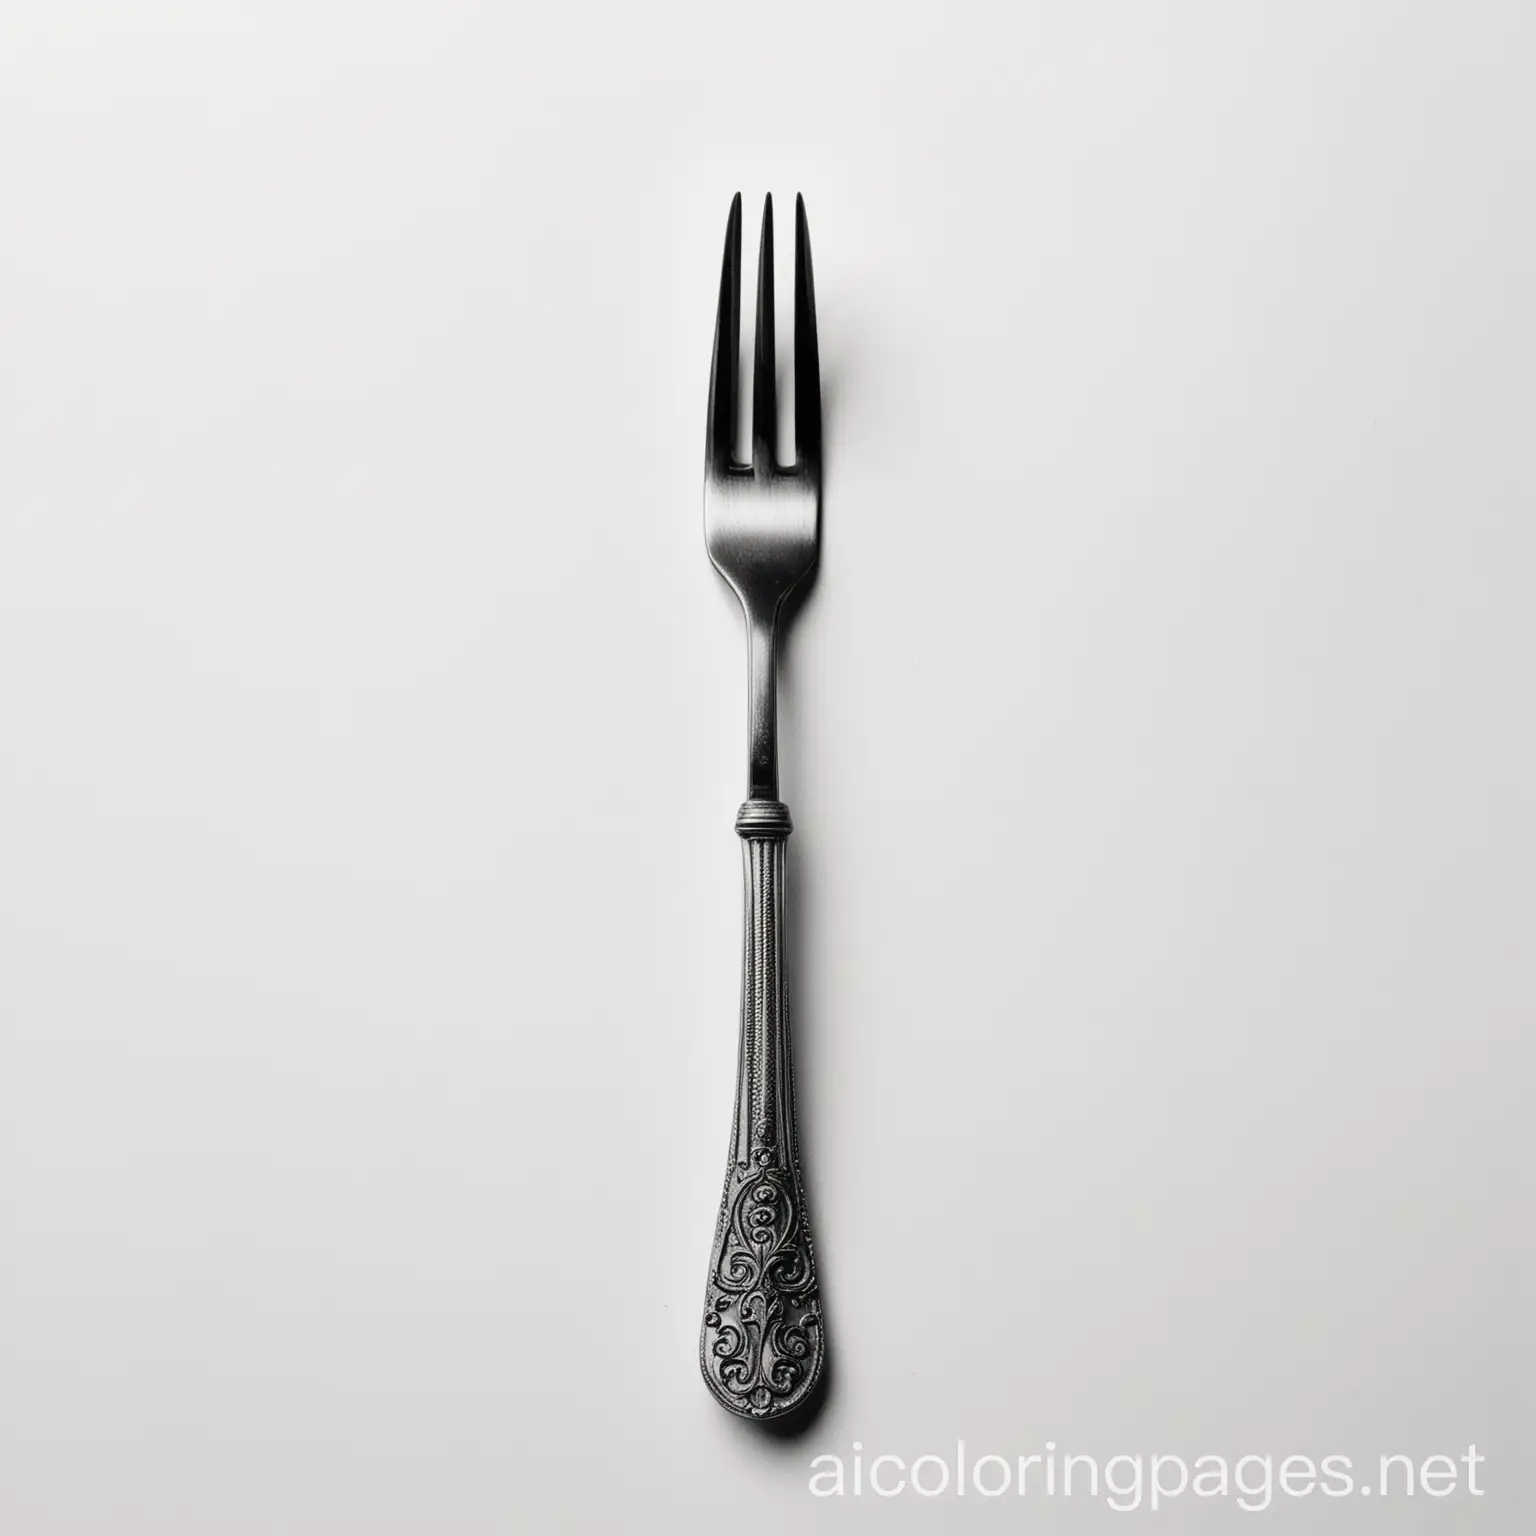 Fork-Coloring-Page-on-White-Background-Simplicity-and-Ample-White-Space